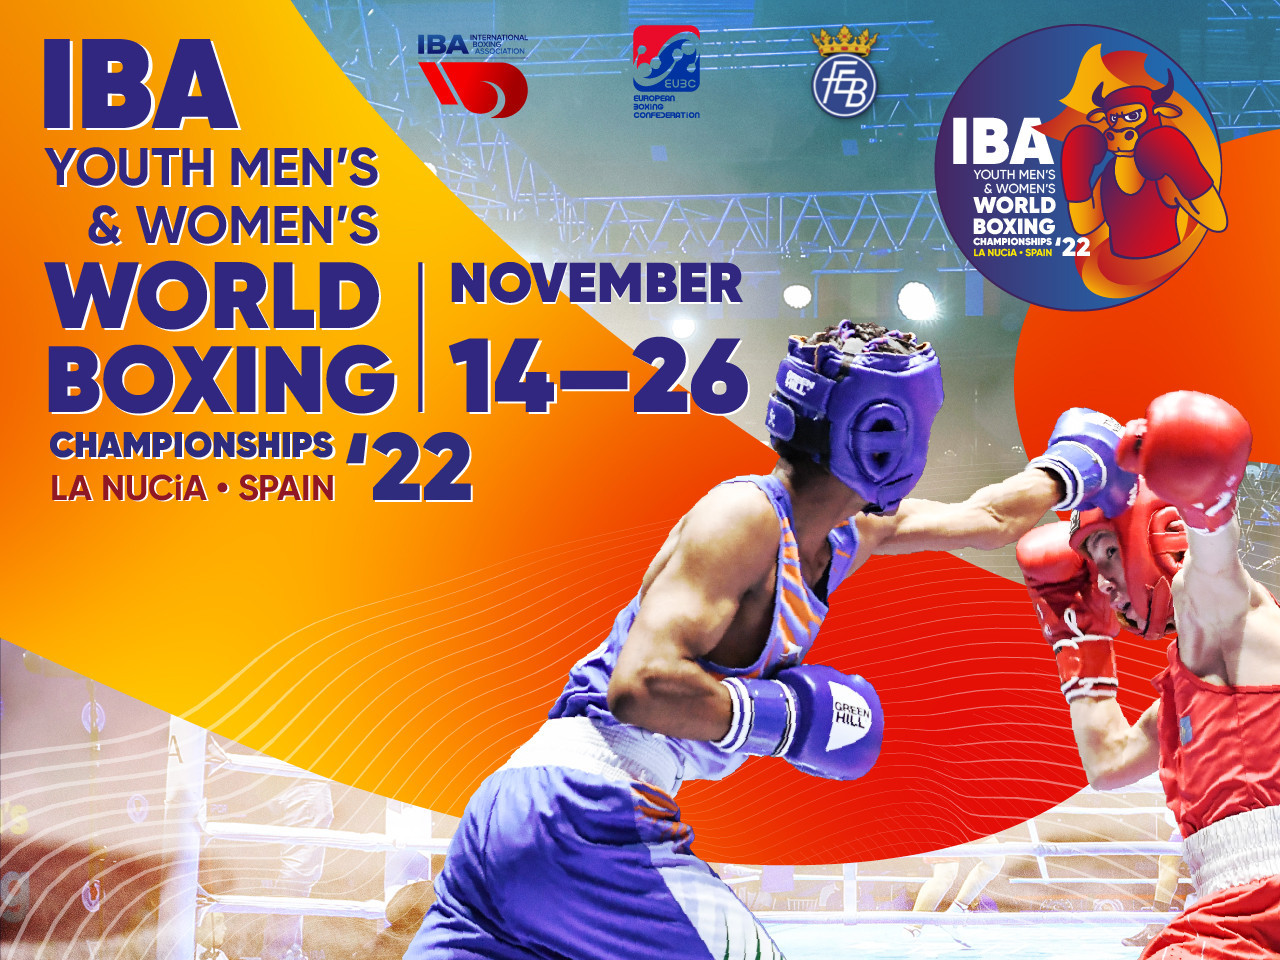 La Nucía has been awarded the IBA Youth Men's and Women's World Boxing Championships ©IBA